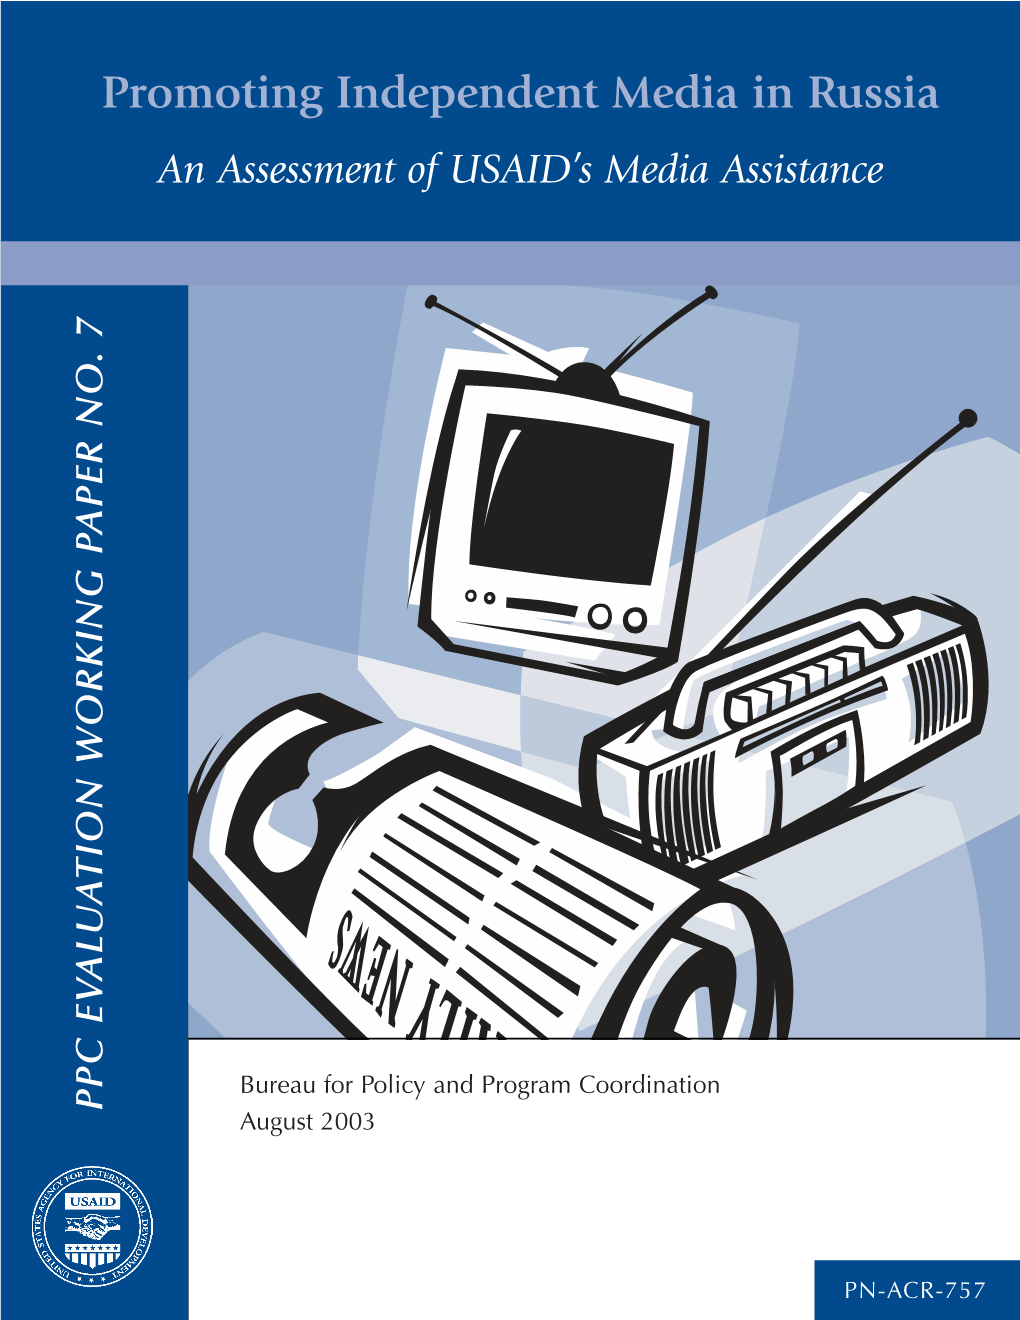 Promoting Independent Media in Russia an Assessment of USAID’S Media Assistance